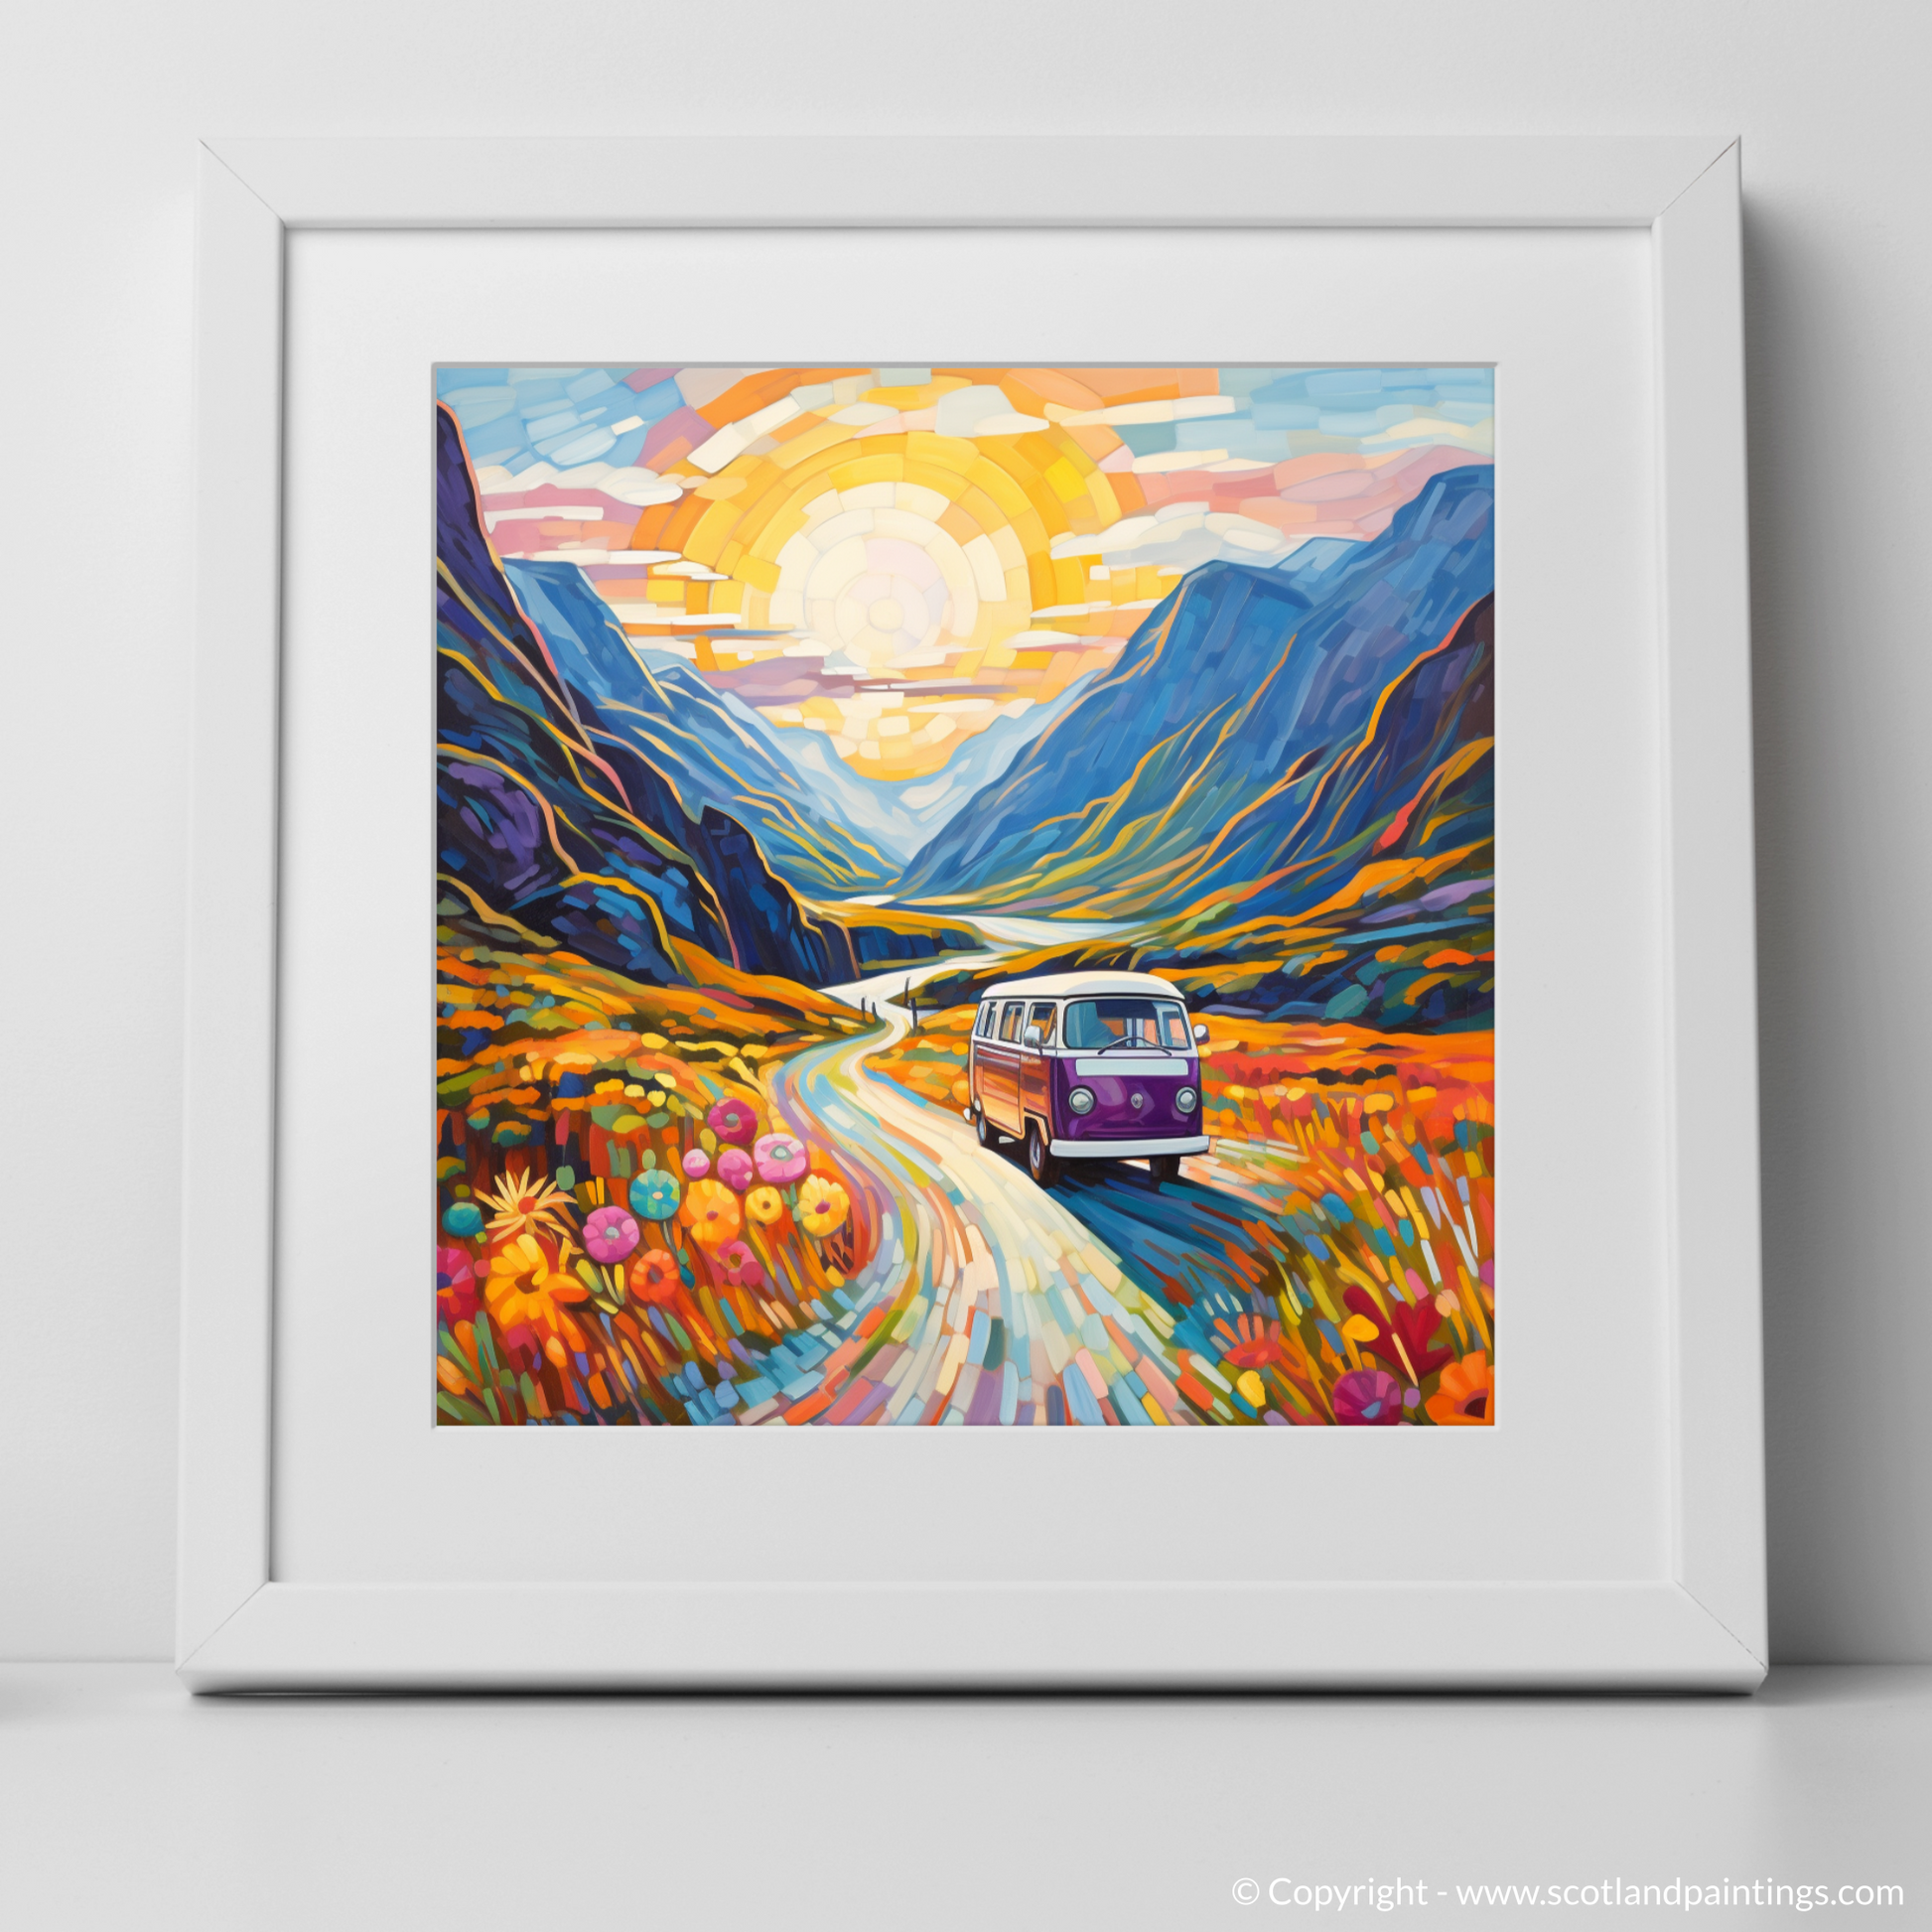 Art Print of Campervan in Glencoe during summer with a white frame